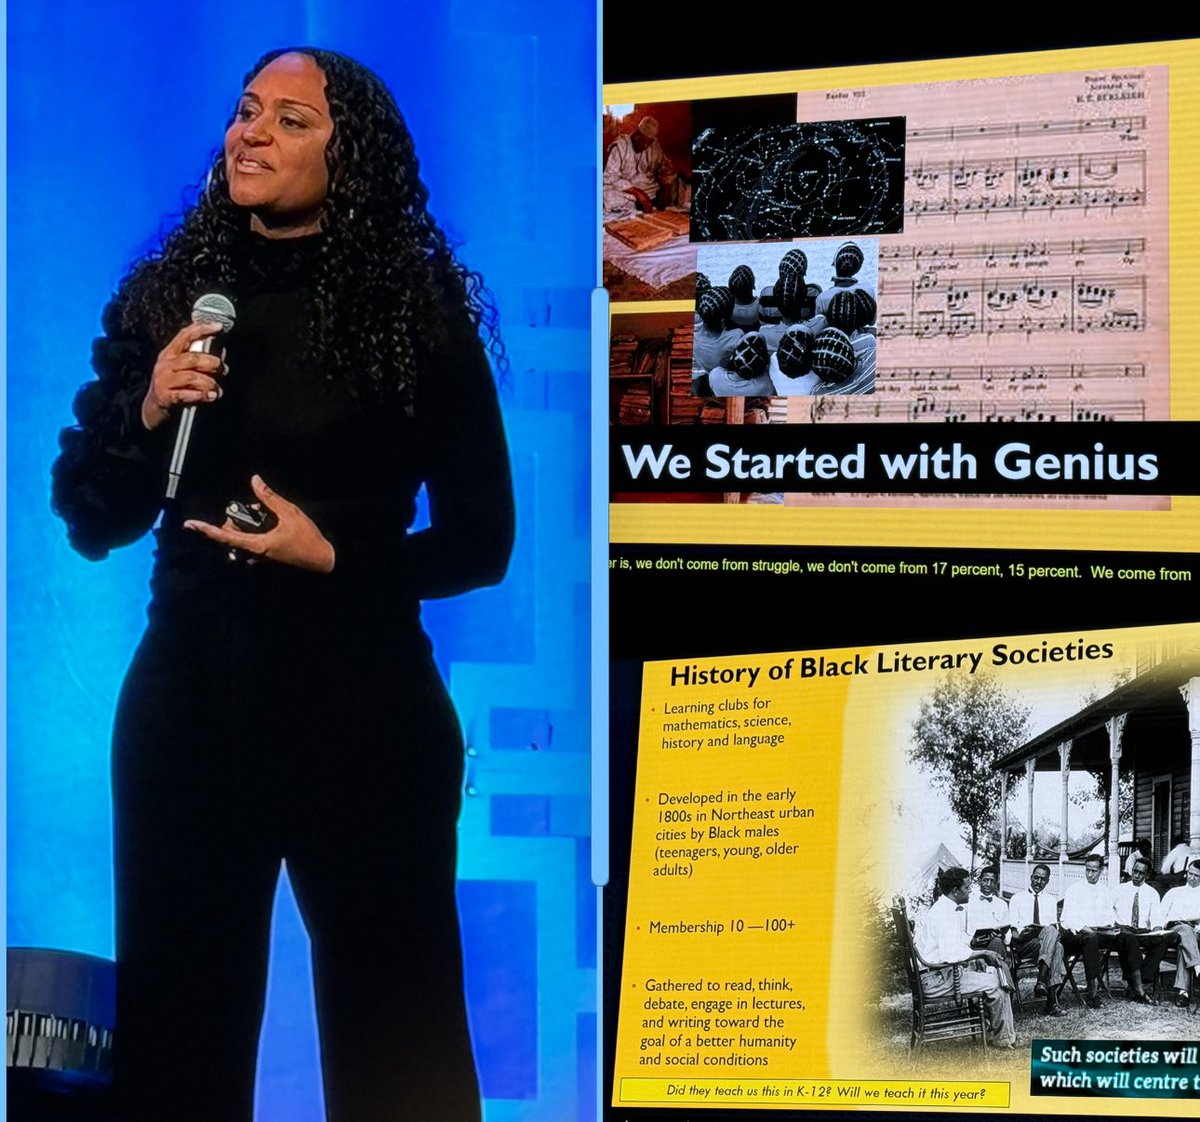 Thank you @GholdyM for reminding us of the power of cultivating an atmosphere of JOY for our students! Annnnd that our people started with GENIUS! An inspiring keynote. #NAISPoCC